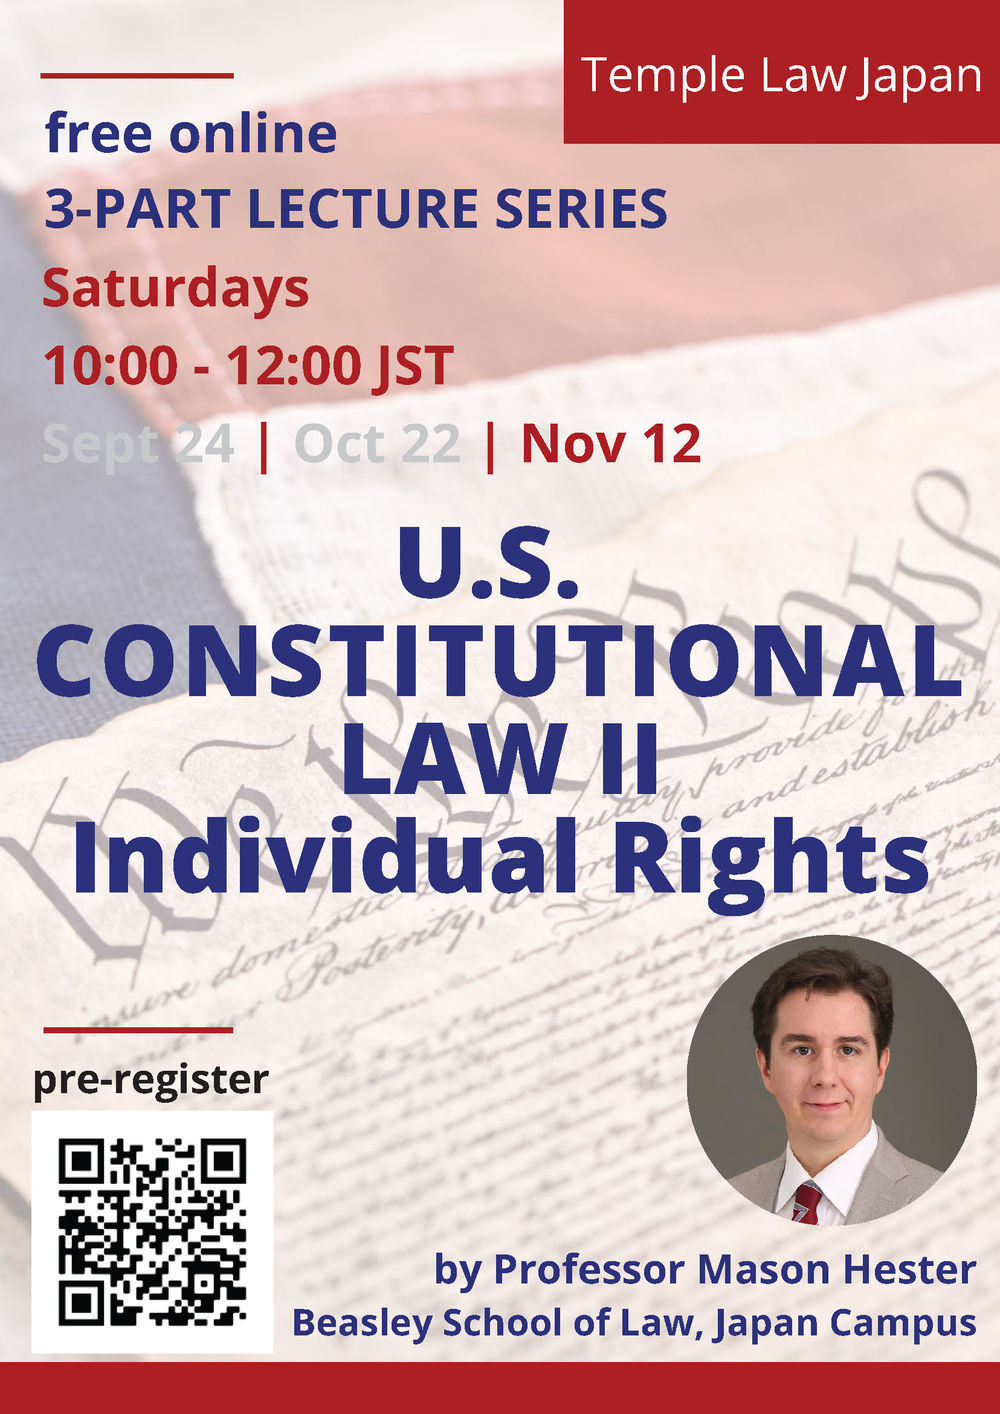 "U.S. Law Primer Lecture Series: Constitutional Law II Individual Rights" event banner